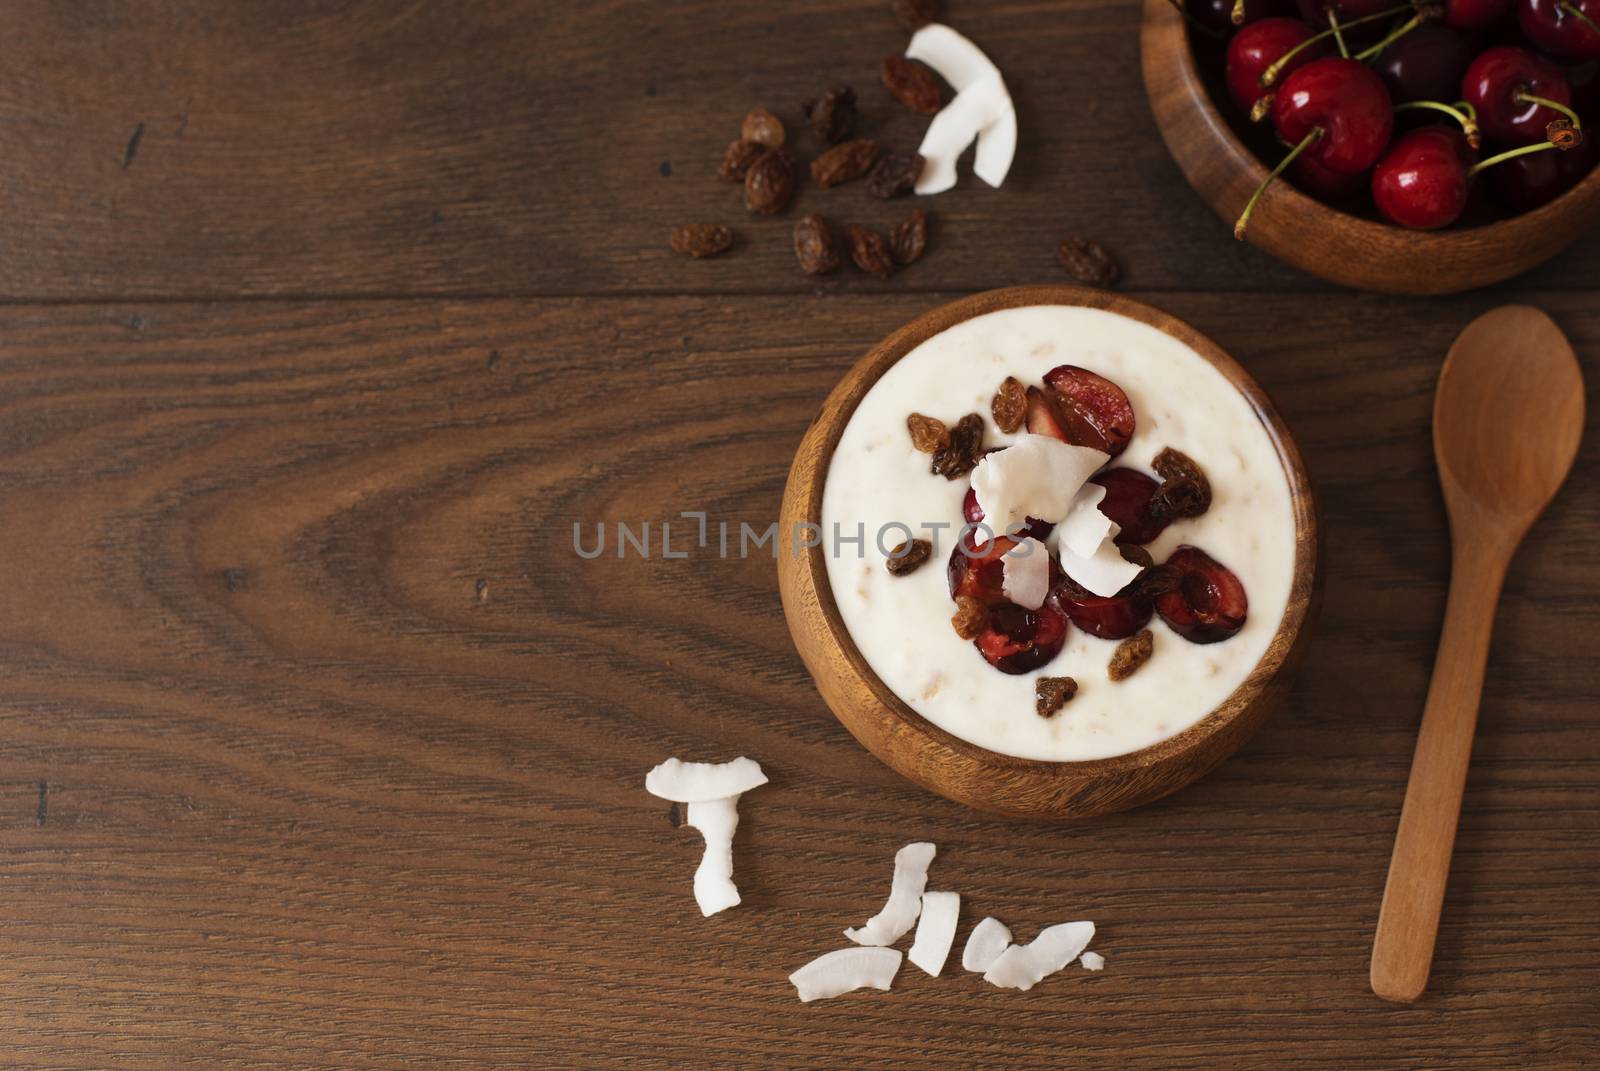 Oat Flakes With Yogurt And Fruits. Cherries, Raisins And Coconut Chips. Overnight Breakfast. Healthy Food Concept. Fitness Mood Diet. Summer Light Snack. Dark Wooden Background